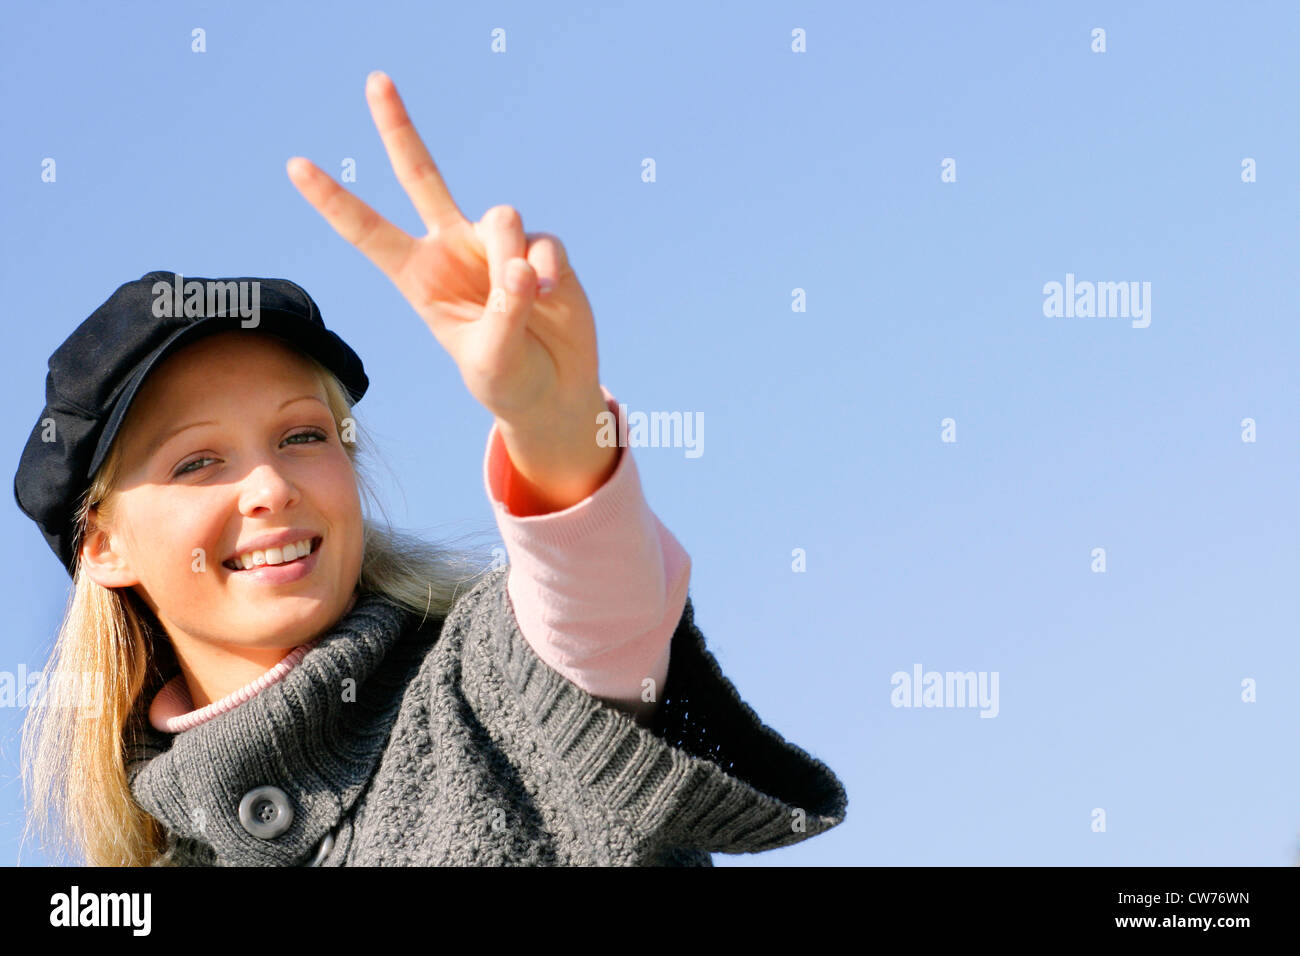 young blond girl with cap, showing the victory sign Stock Photo